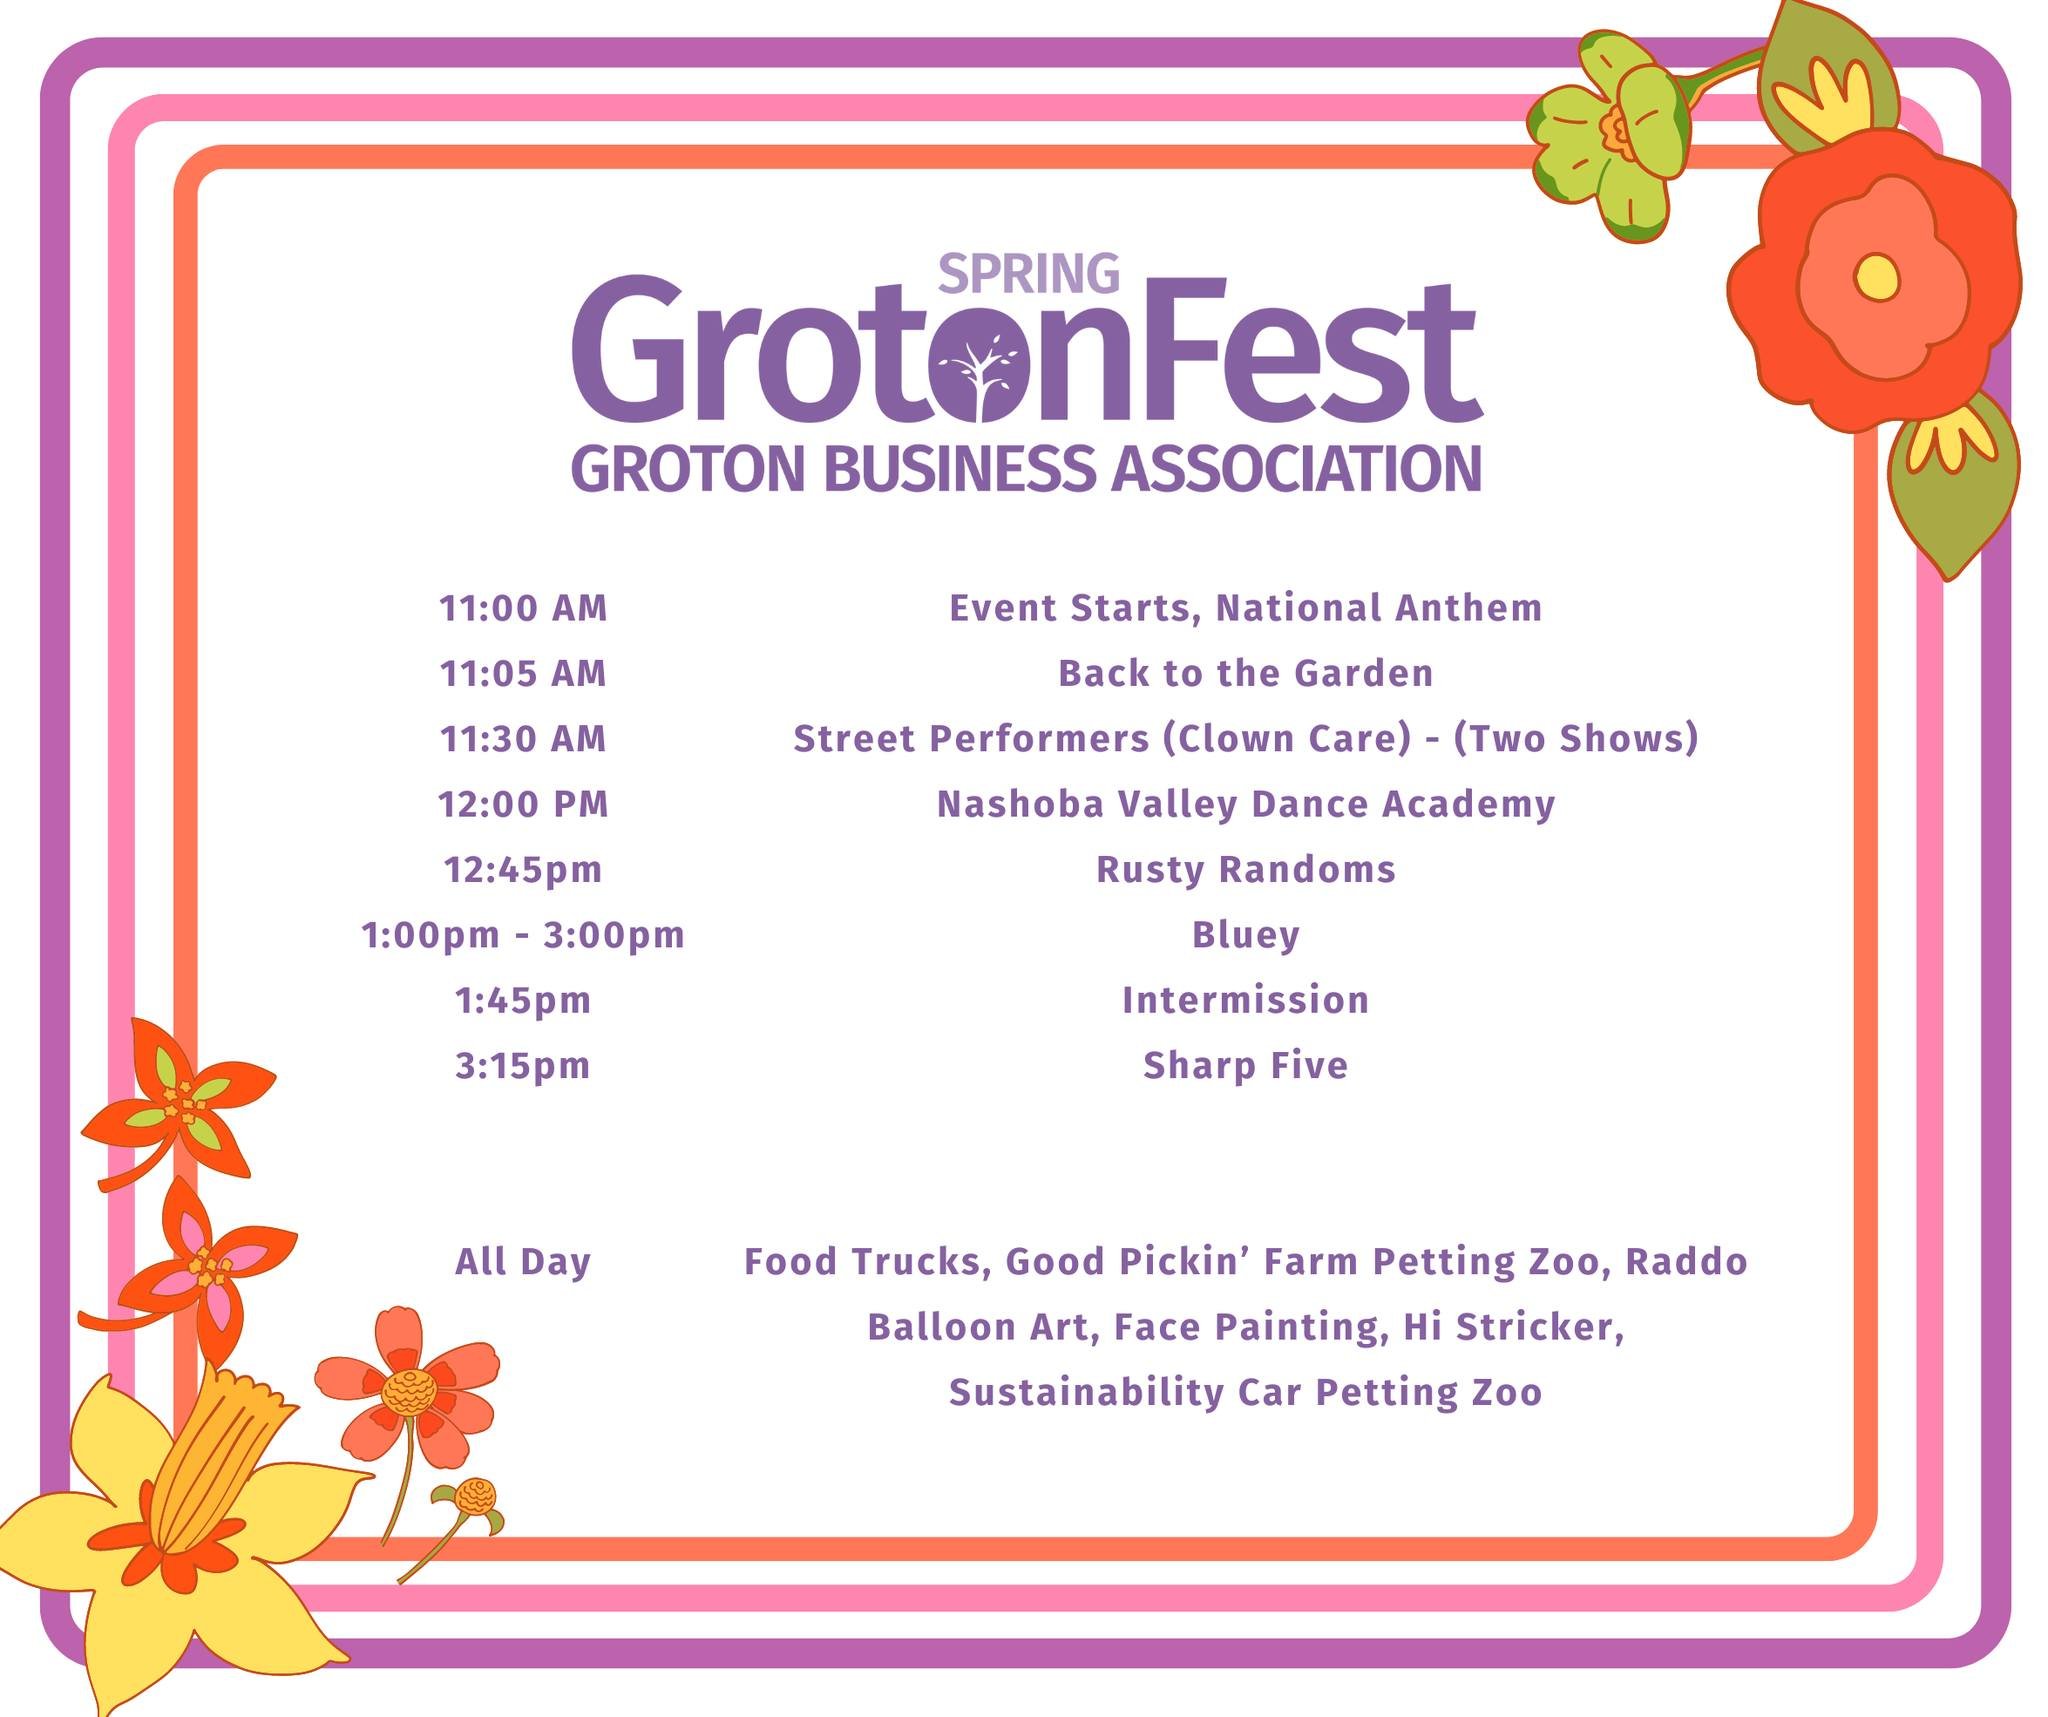 This Sunday (May 19th) from 11-4pm.

Join us at 145 Main Street in Groton, MA for a day of fun for the whole family! 

Don't miss any of the excitement.